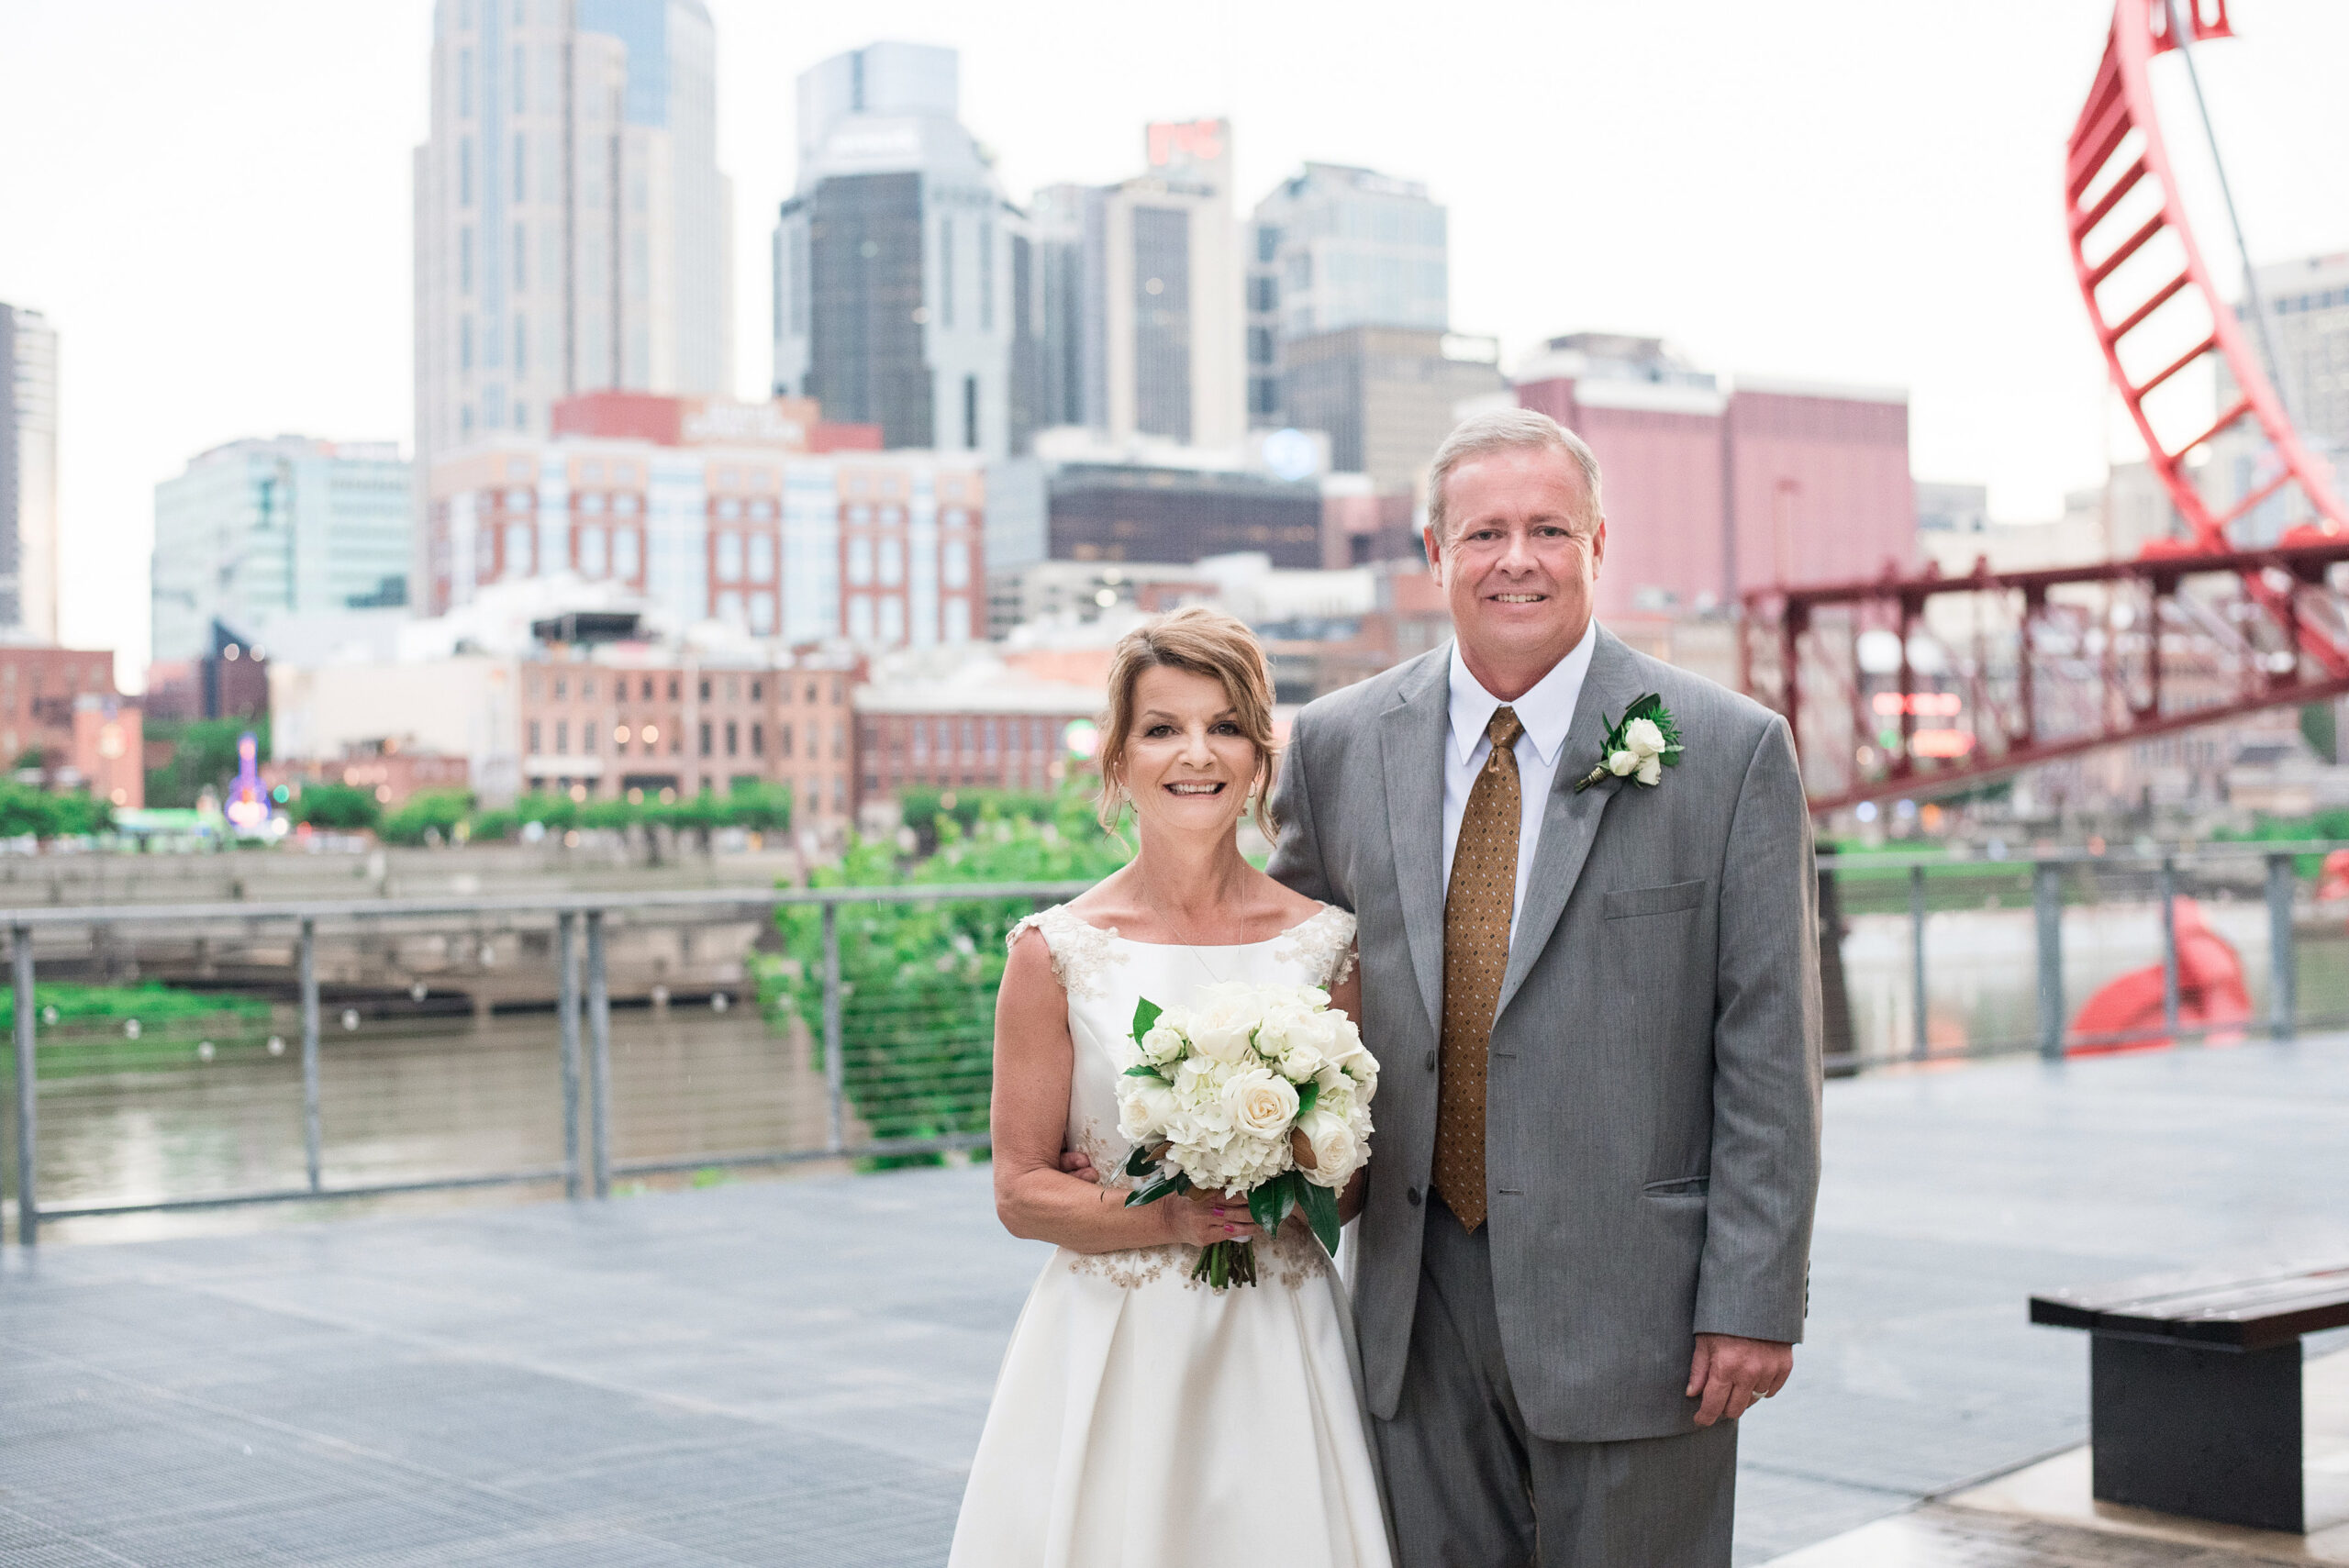 The bride and groom smile at the camera with the skyline and Cumberland River behind them. The bride is wearing a tea length white sleeveless wedding dress with lacy floral accents. The groom  is wearing a gray suit with a white shirt and brown tie and a white boutonniere. The bride is holding a large white bouquet of roses and hydrangea. 